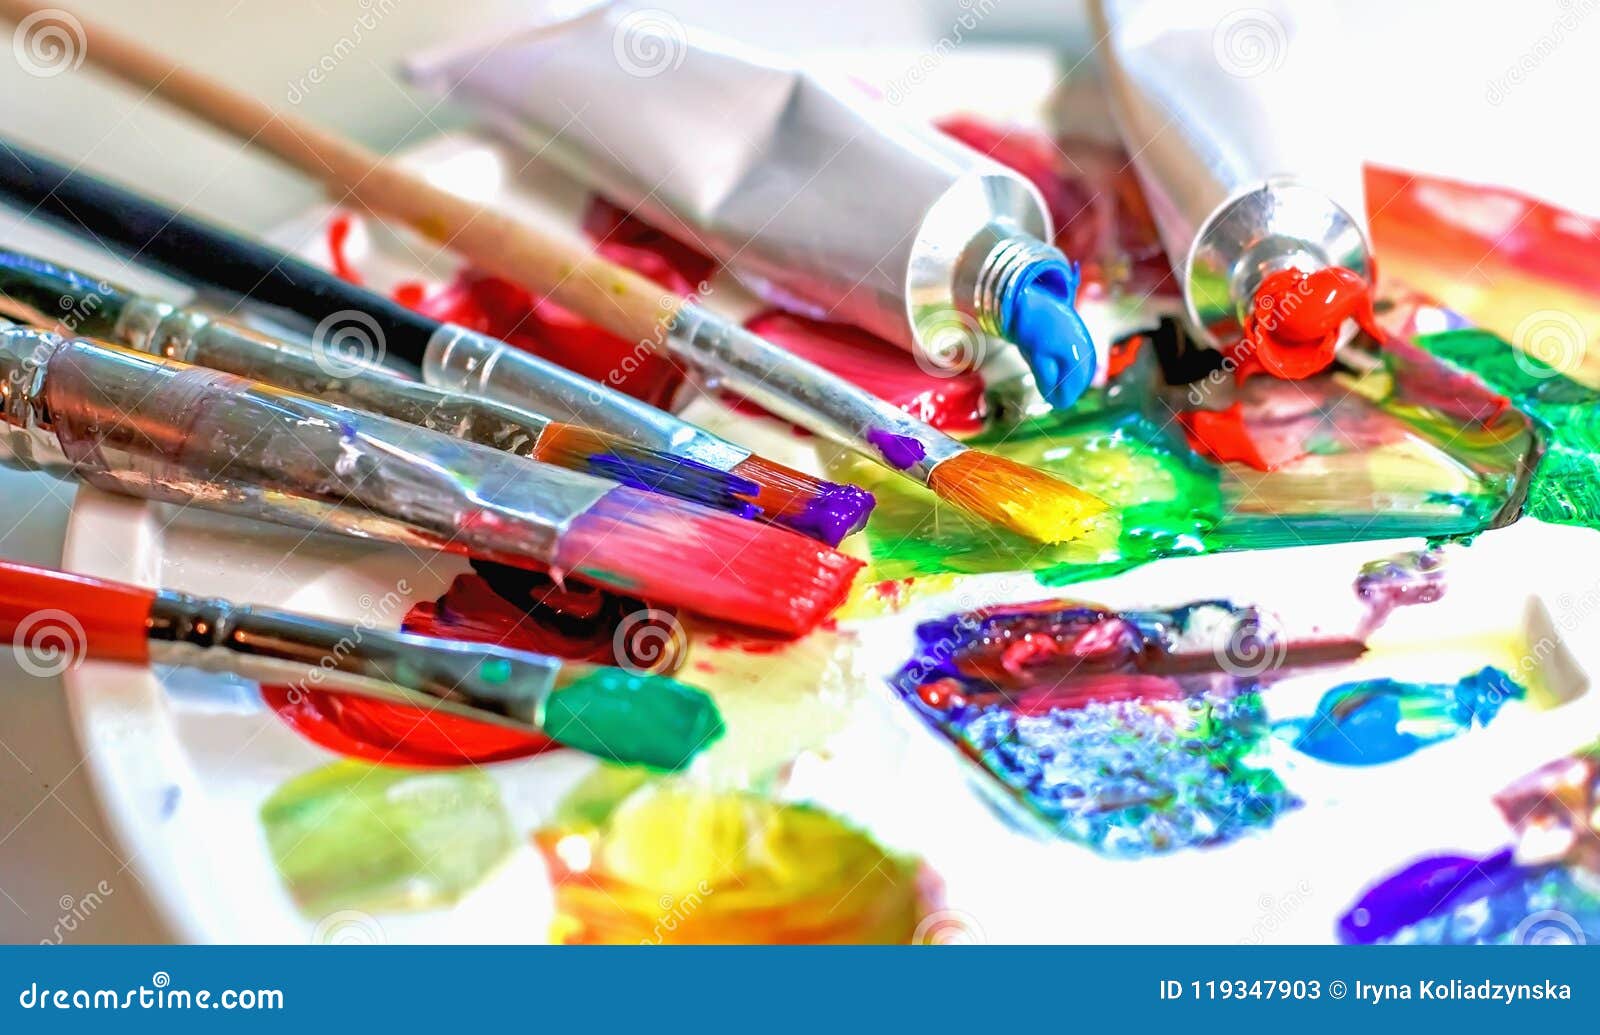 Art Brushes and Paints for Painting on the Used Palette with Paints  Close-up. Stock Image - Image of crop, brushes: 119347881